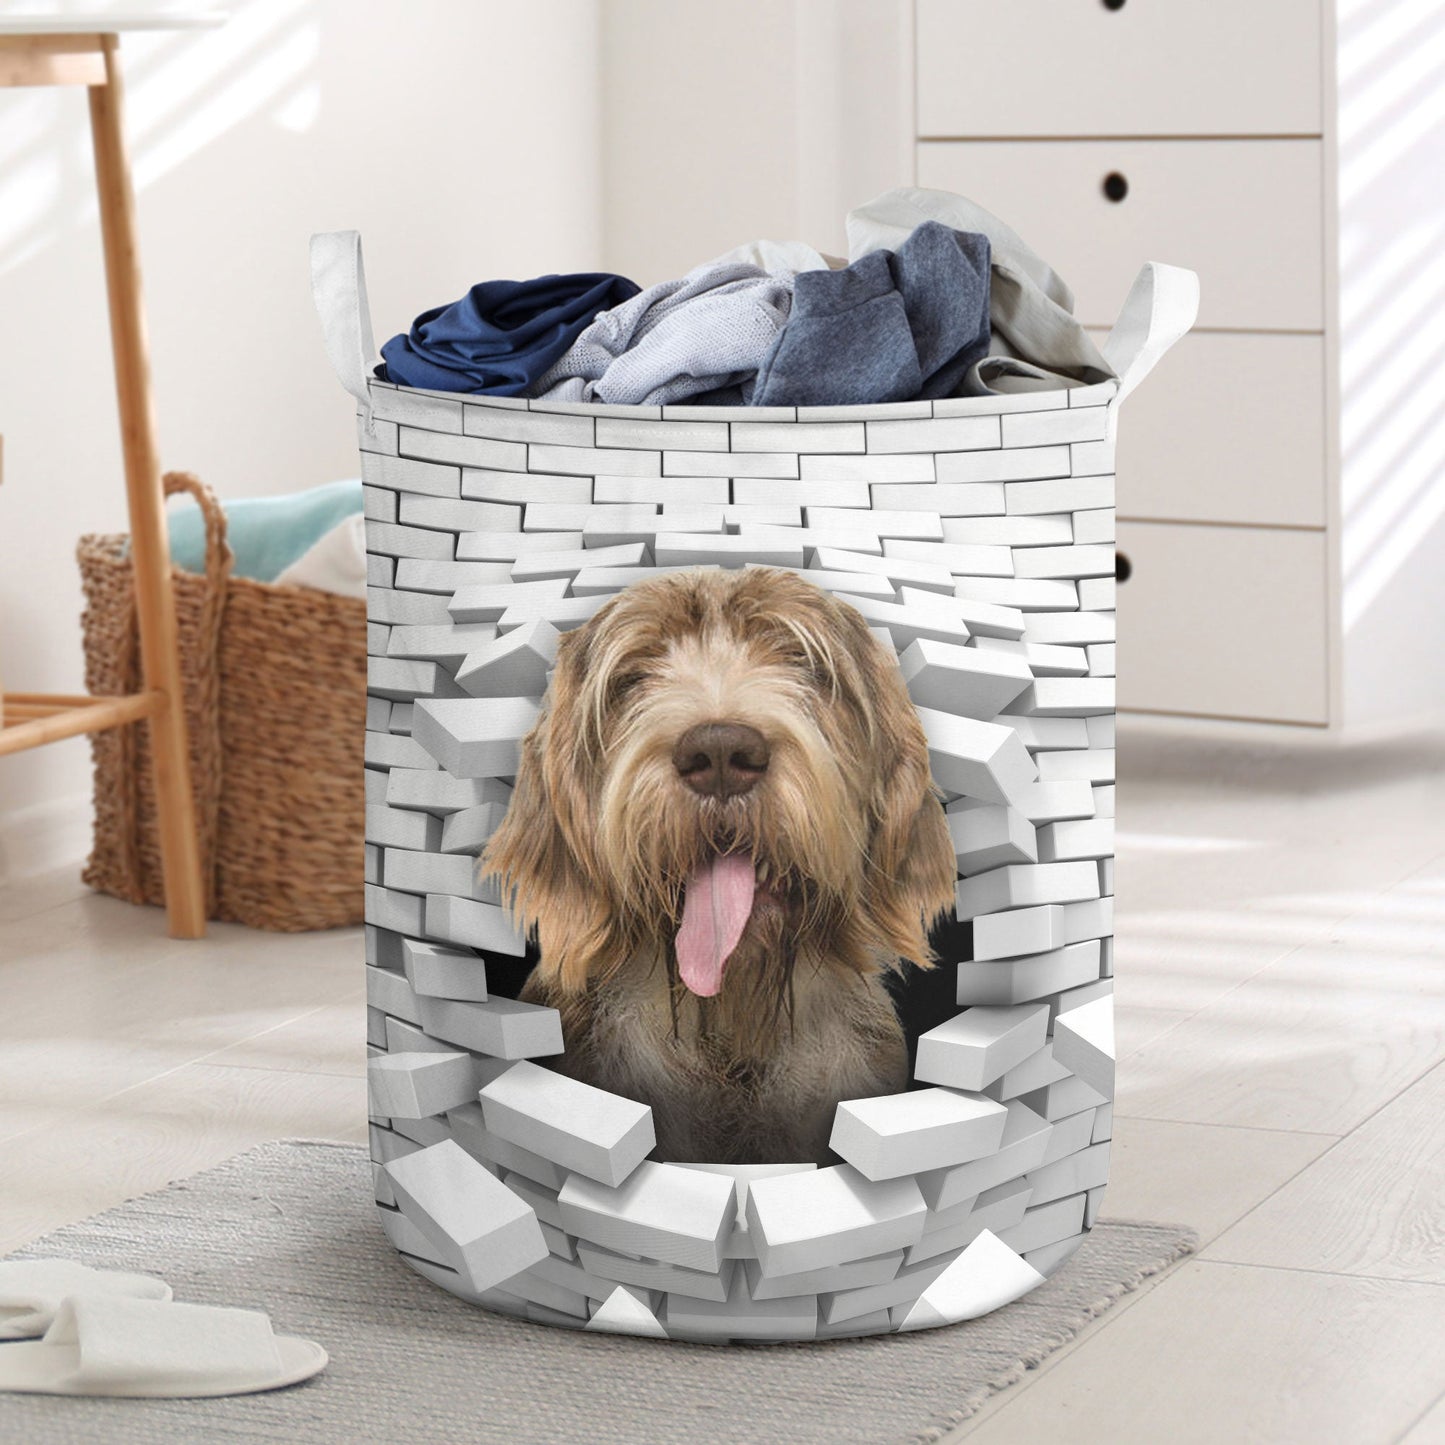 Spinone Italiano - In The Hole Of Wall Pattern Laundry Basket